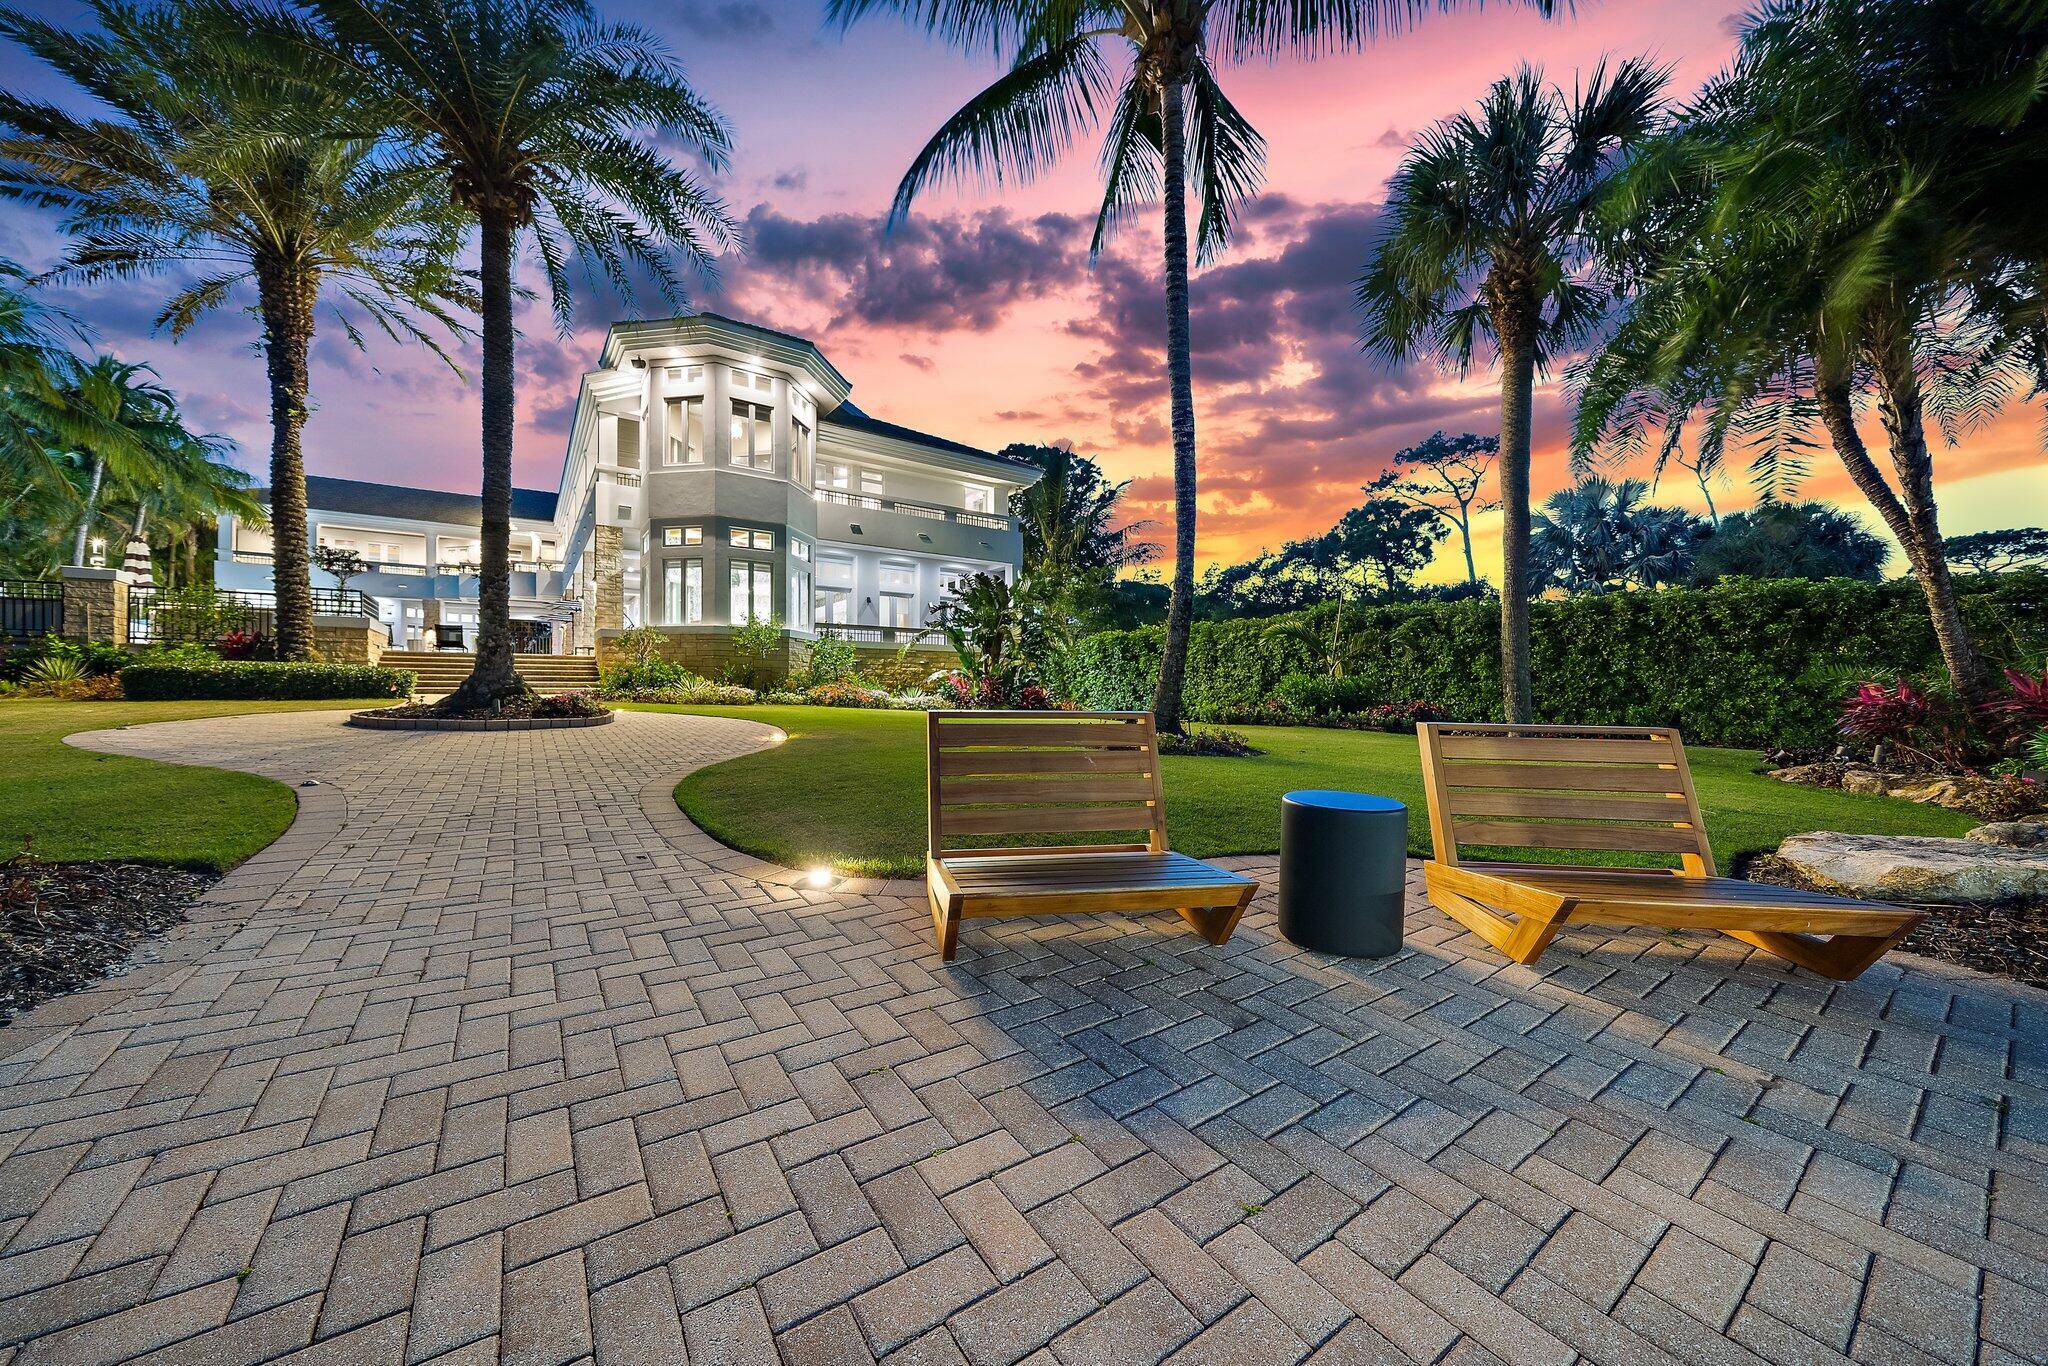 Where can you find an 8 bedroom, 9 bath home with over 9300 SF of AC space, 4 garages, directly on the Intracoastal Waterway with 105 feet of frontage in ...